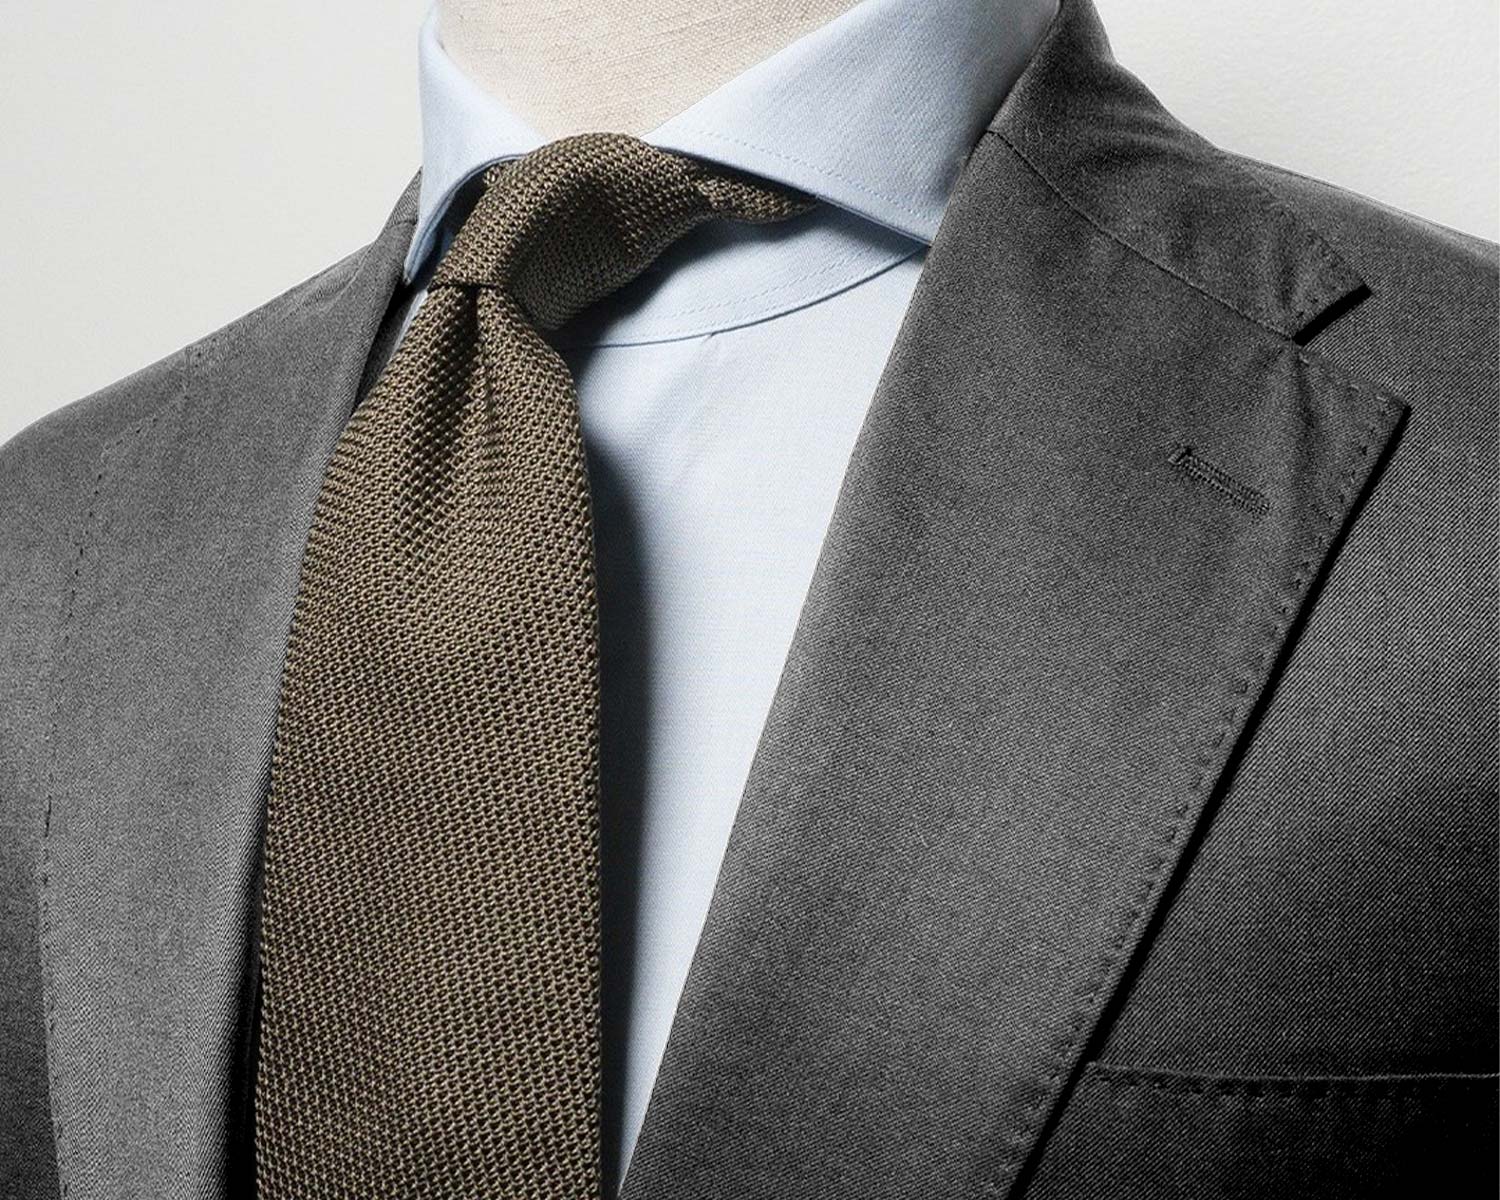 Refining Spring Suits for Men so You're in Full Bloom - Grey Suit with Olive Grenadine Tie